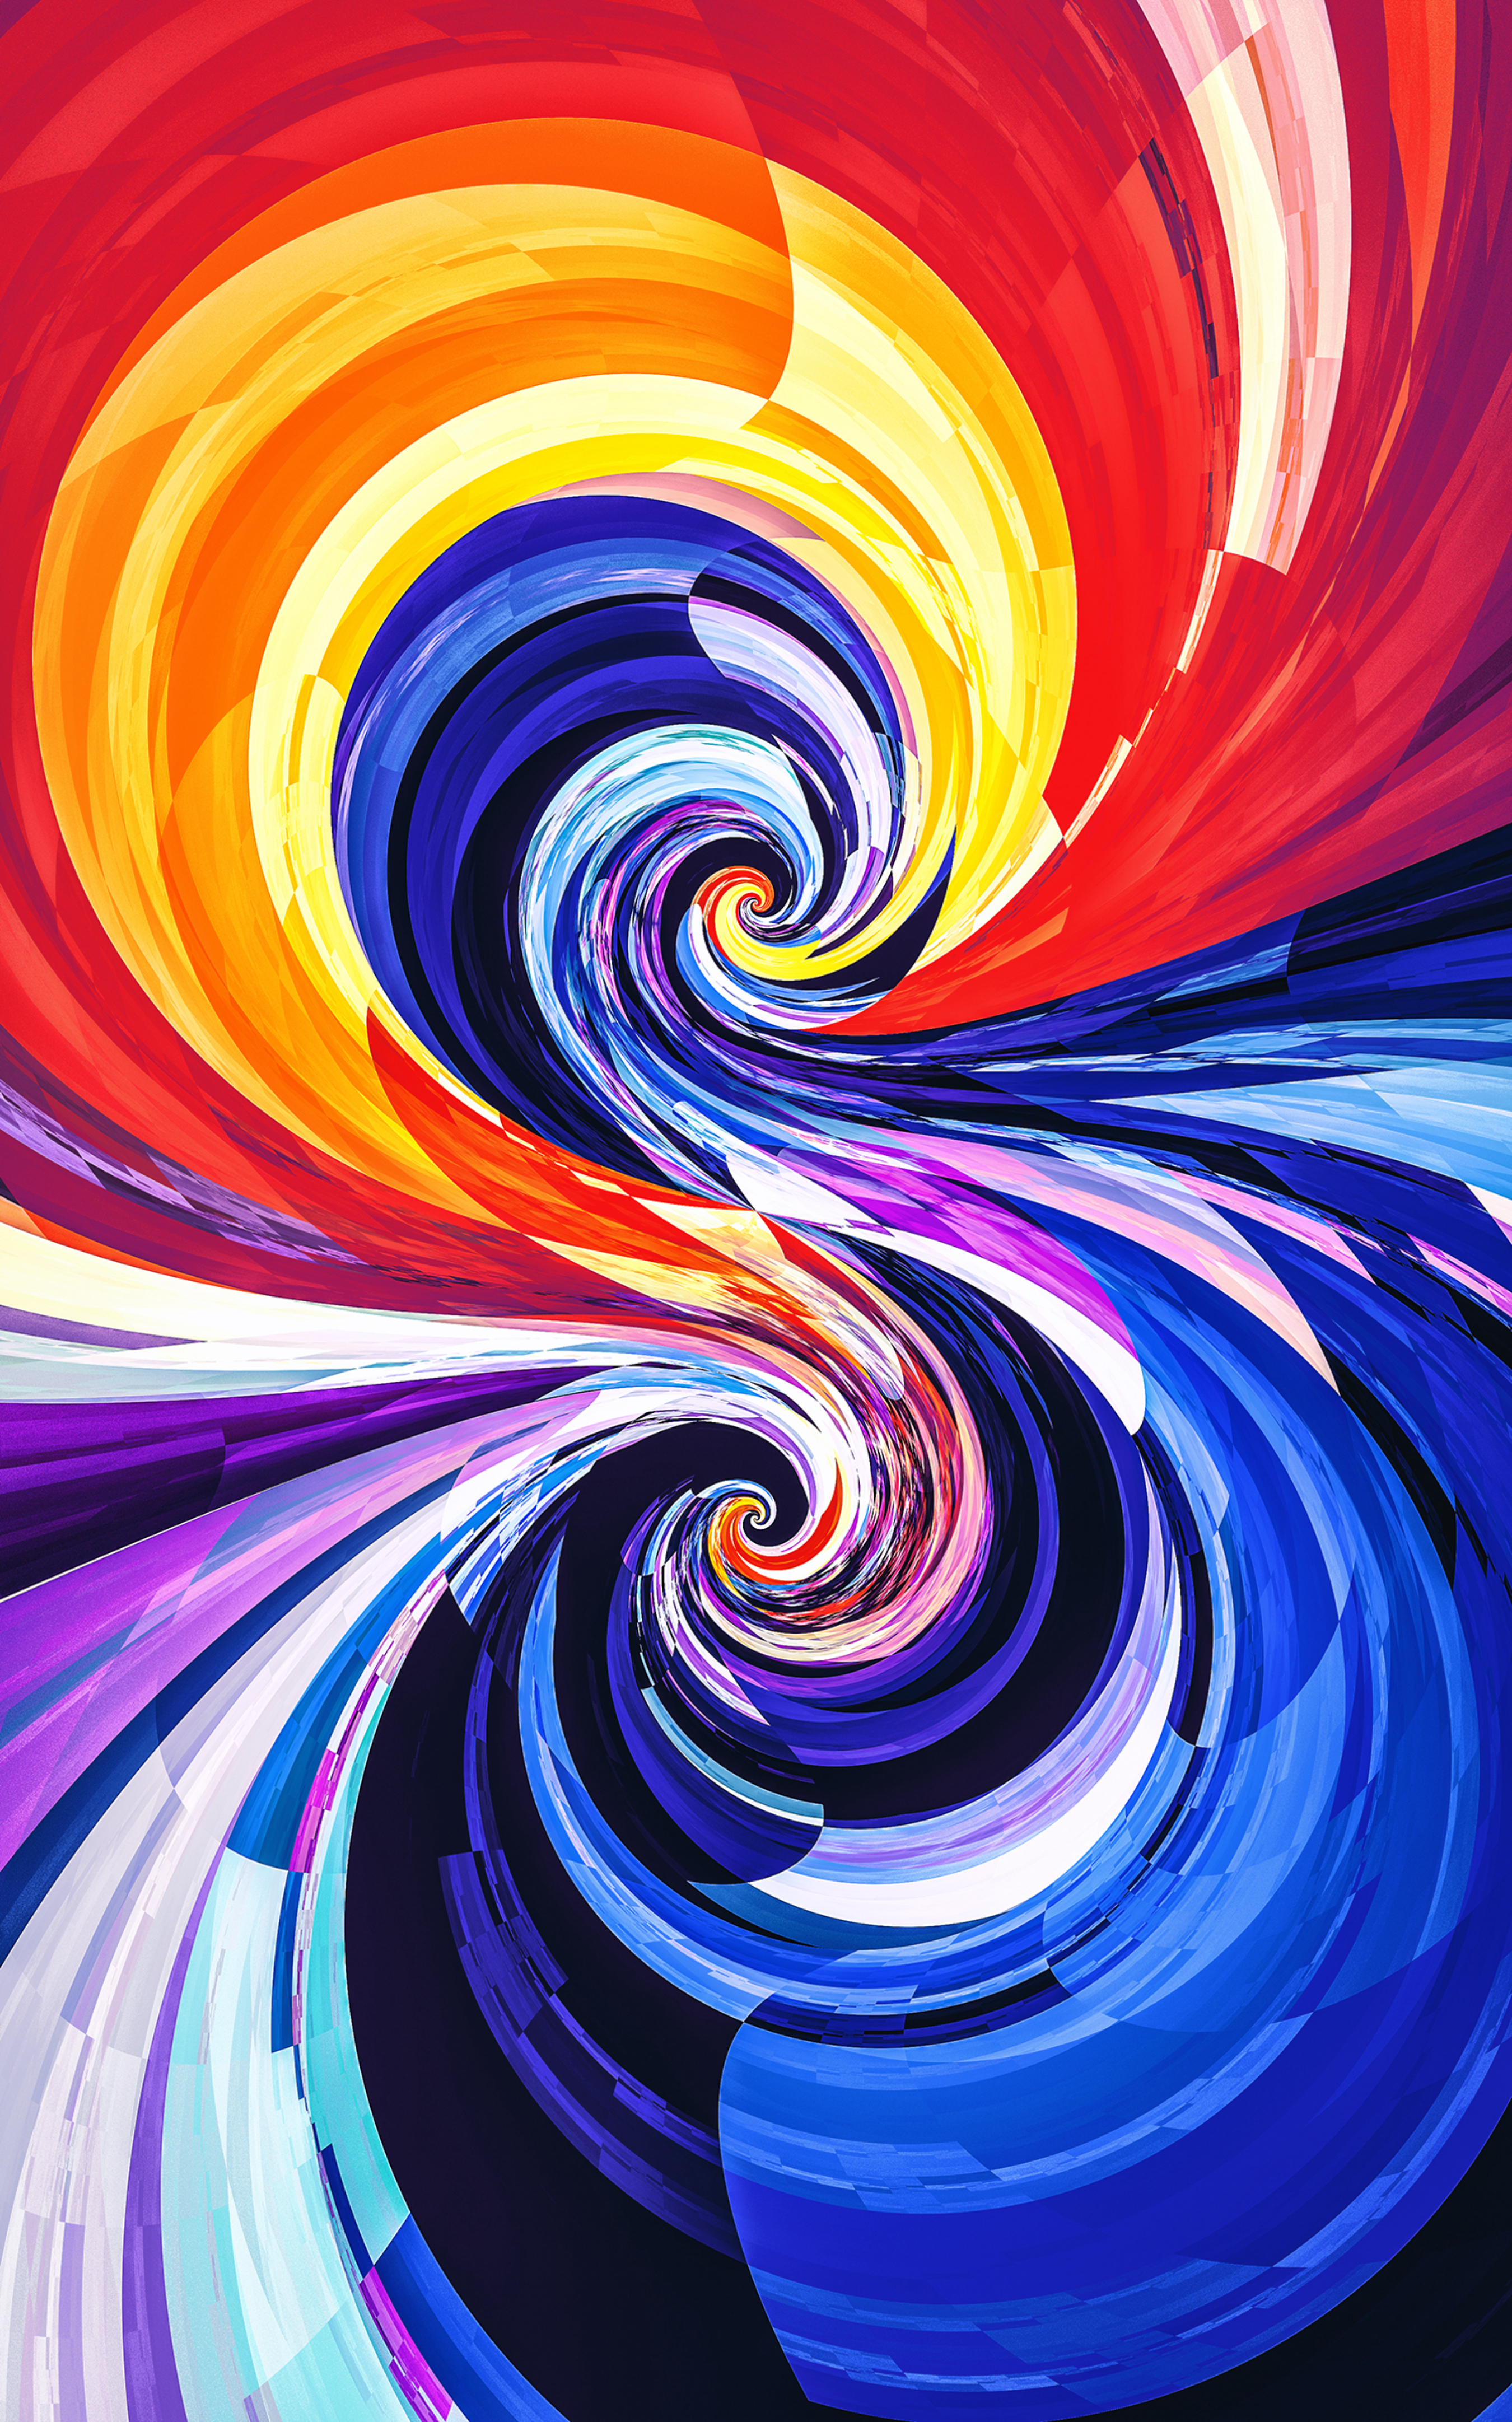 circles, abstract, multicolored, motley, spiral, spirals, swirling, involute